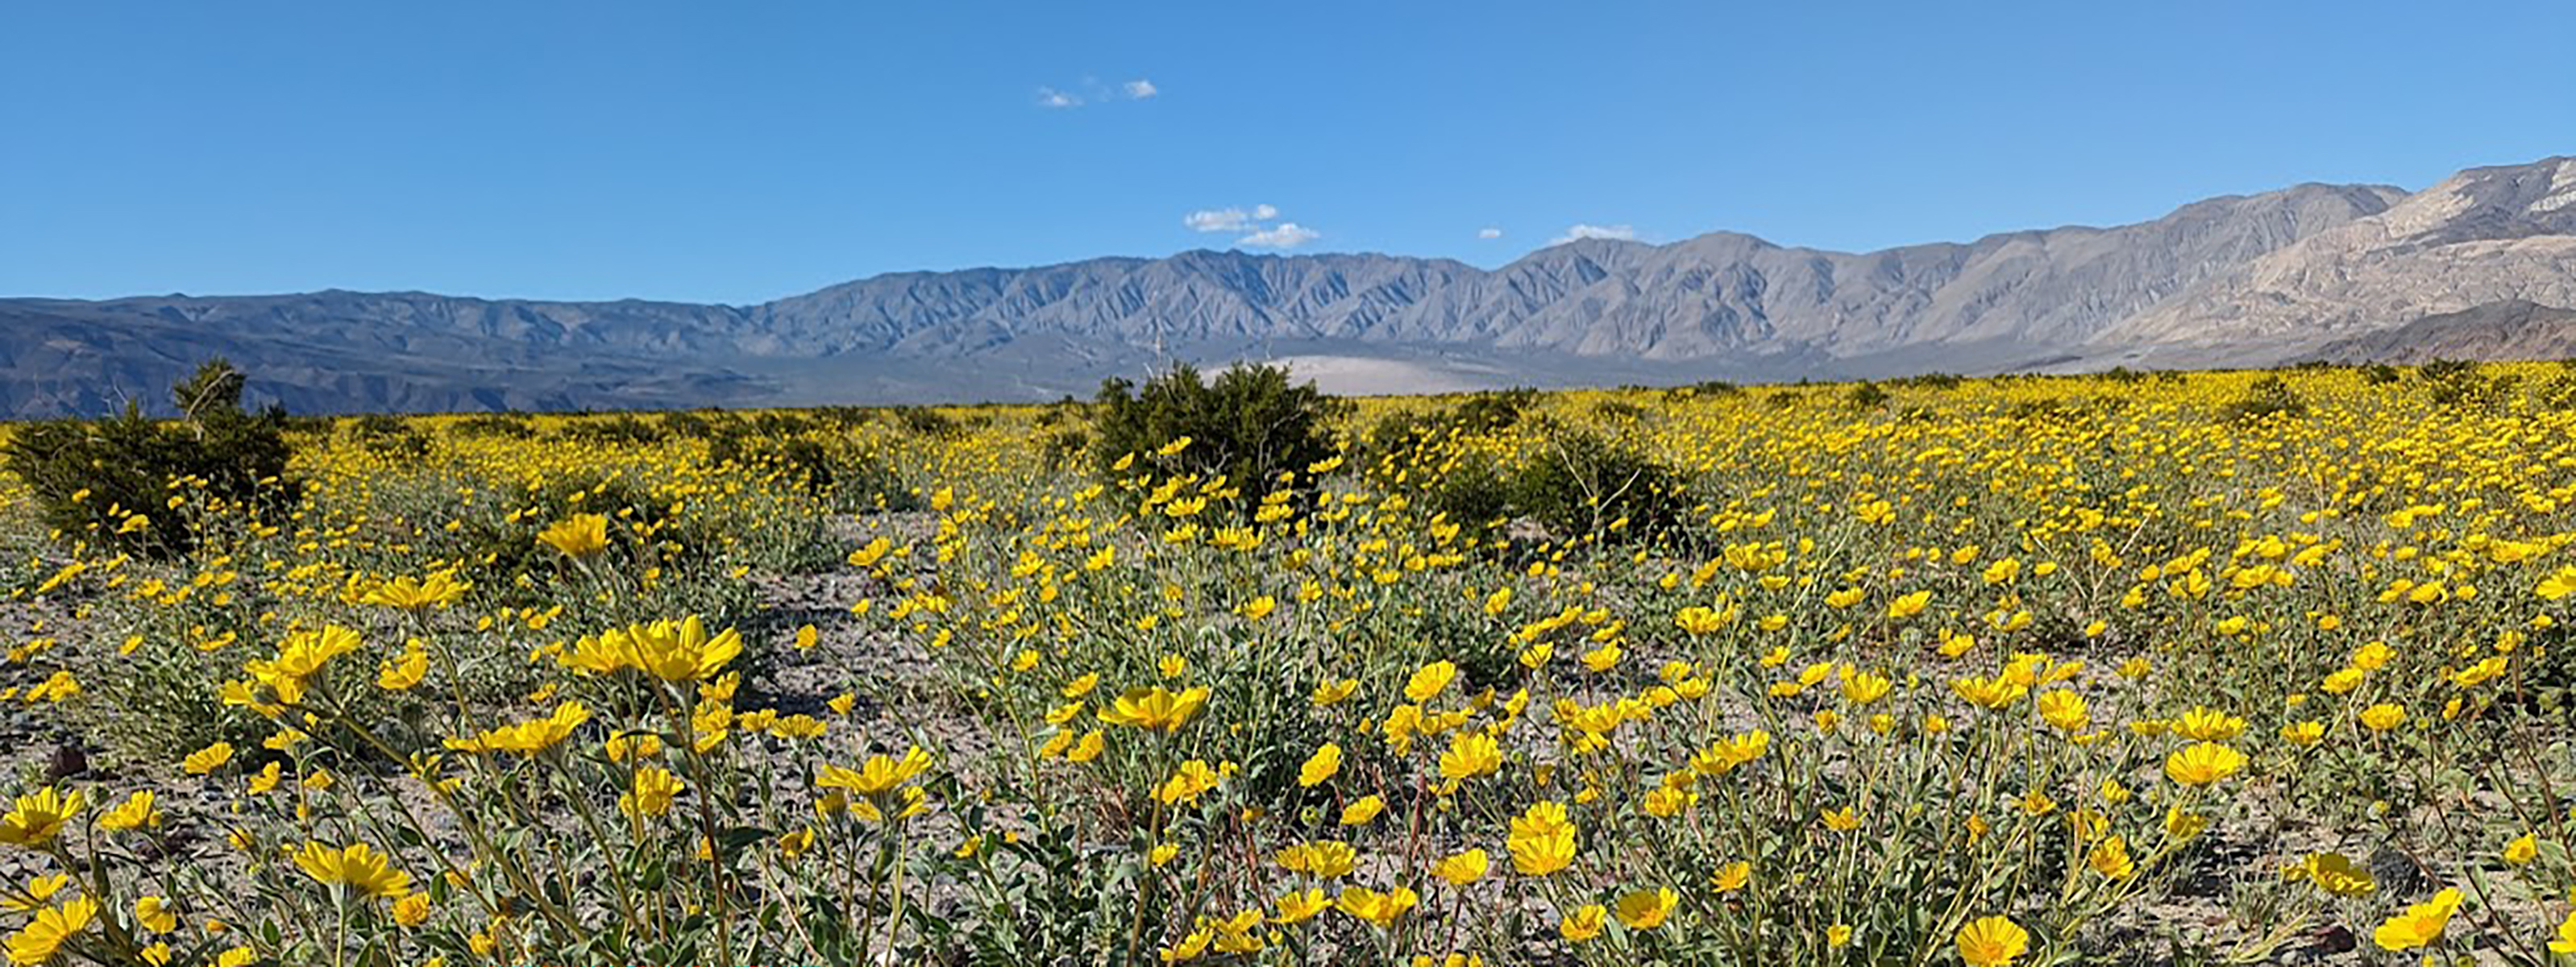 Bright yellow flowers with long green stems cover the desert floor with mountains in the background.